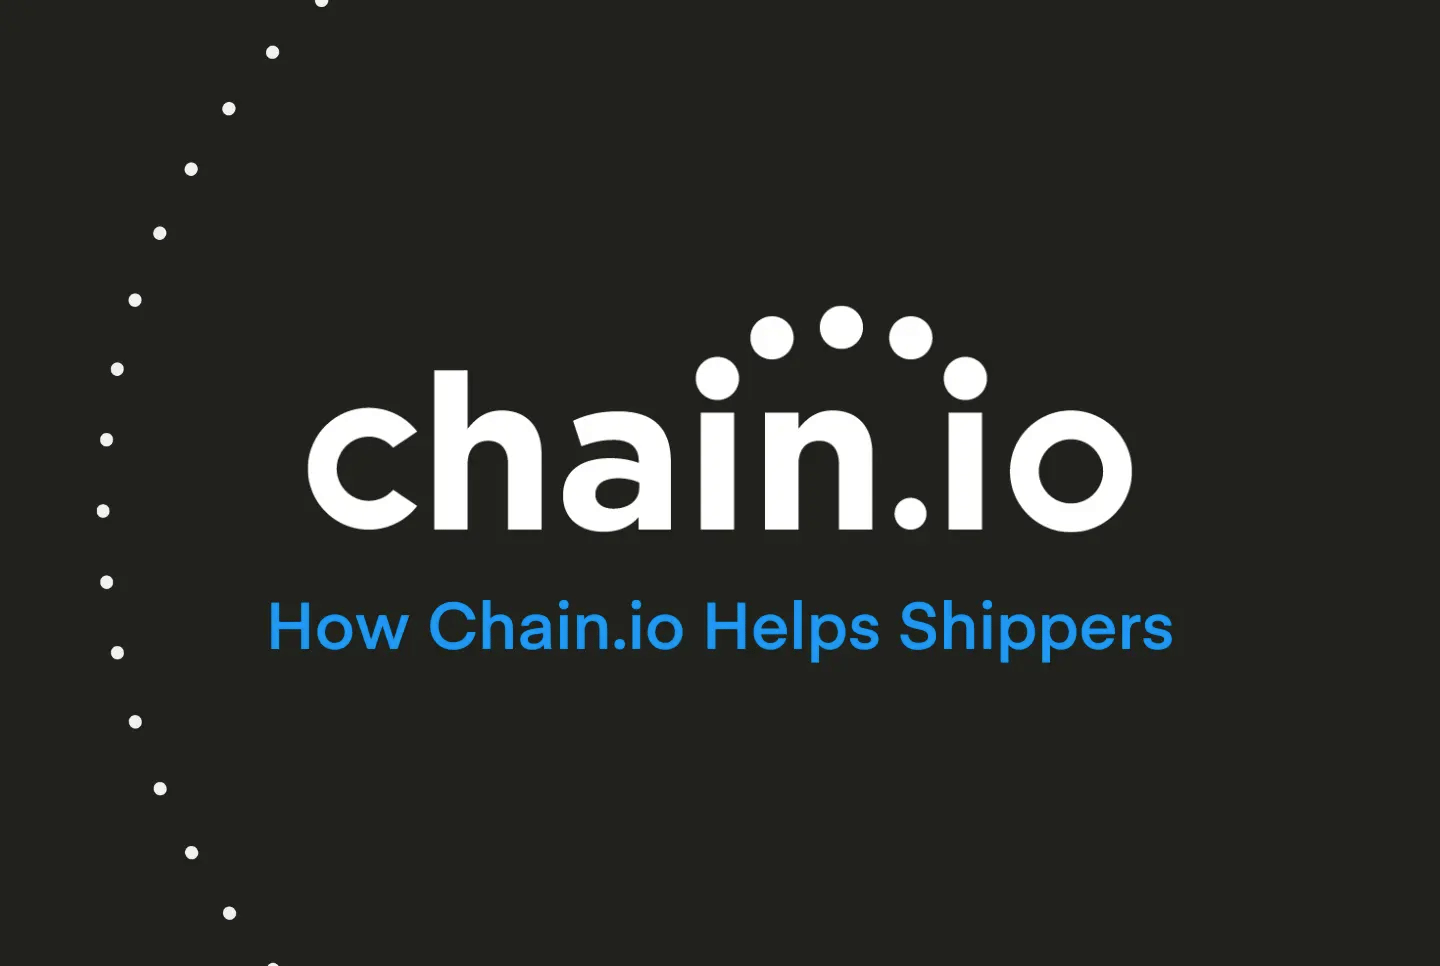 How Chain.io helps shippers integrate with partners across the global supply chain